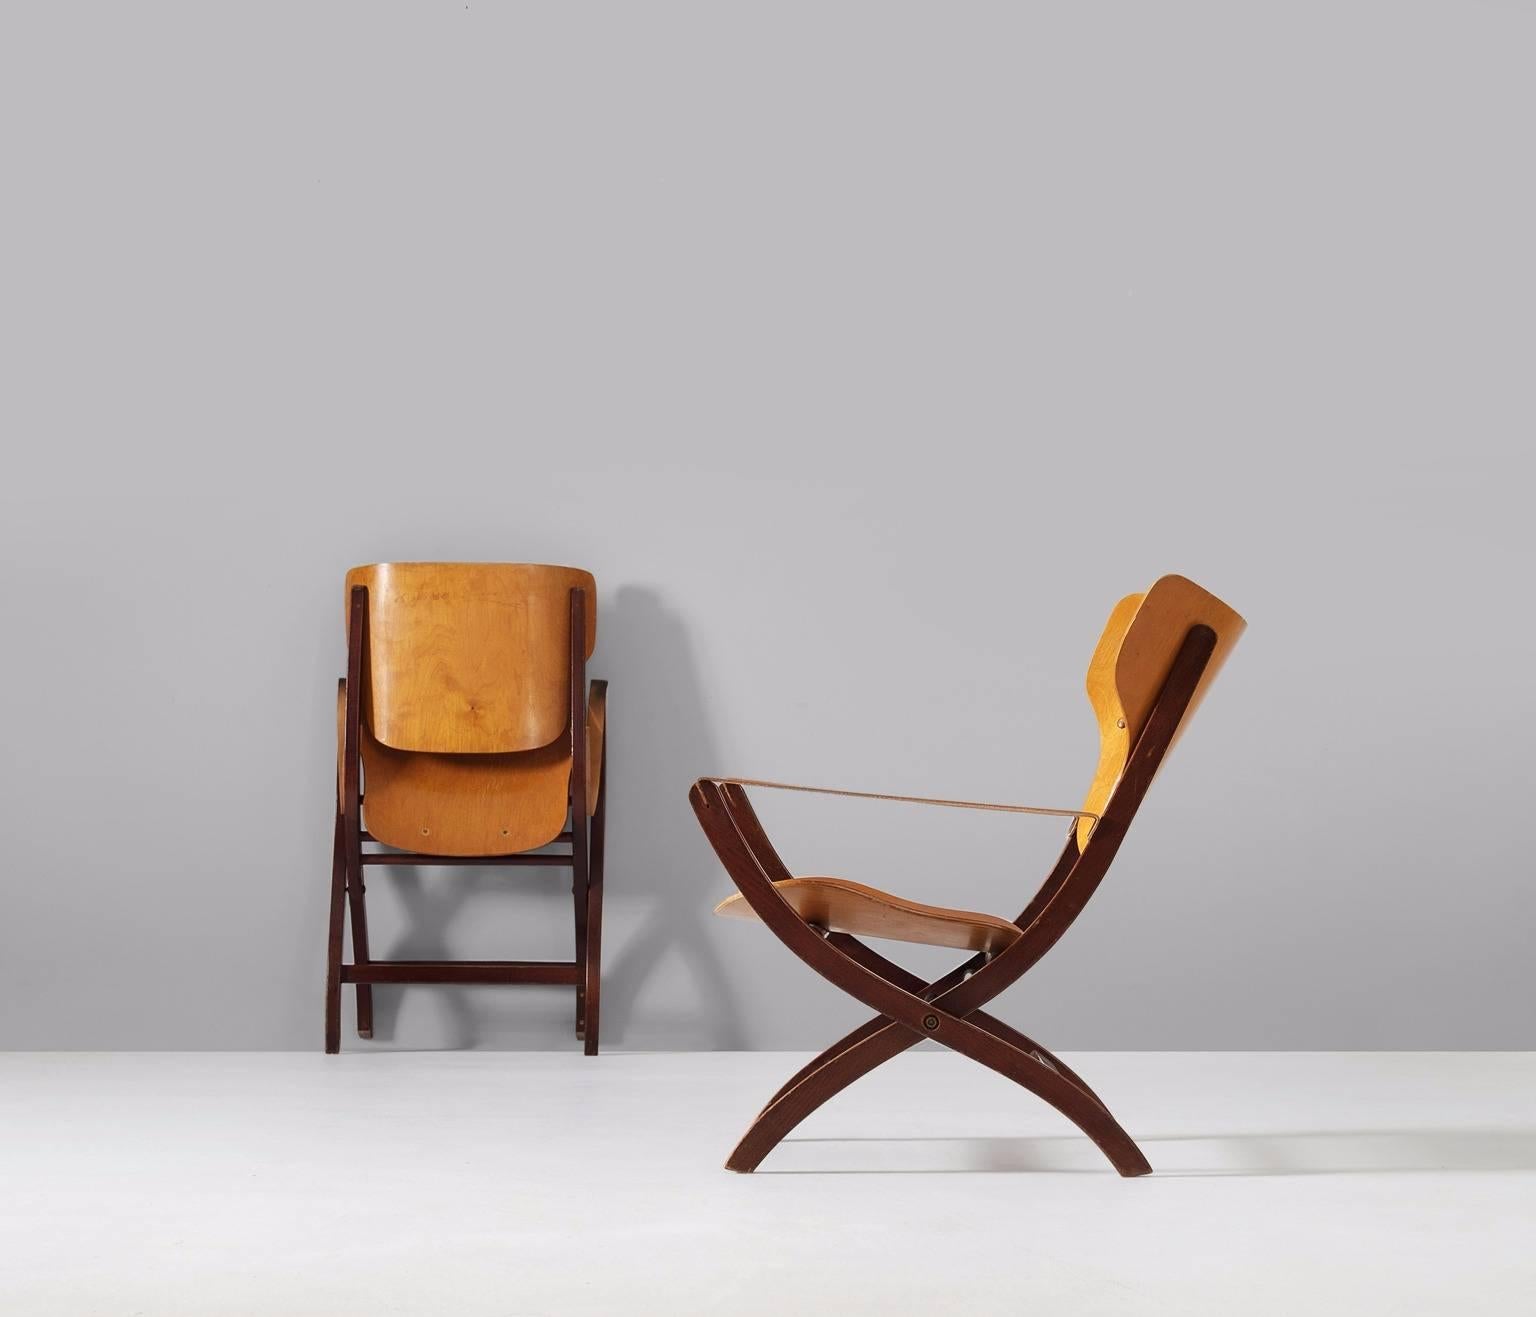 A pair of Egyptian chairs, in beech and birch, by Poul Hundevad, Denmark 1950s. 

These folding chairs have X- shaped legs, inspired on ancient Egyptian thrones and chairs. The frame is from solid beech, stained in a dark brown/ ruby red color.